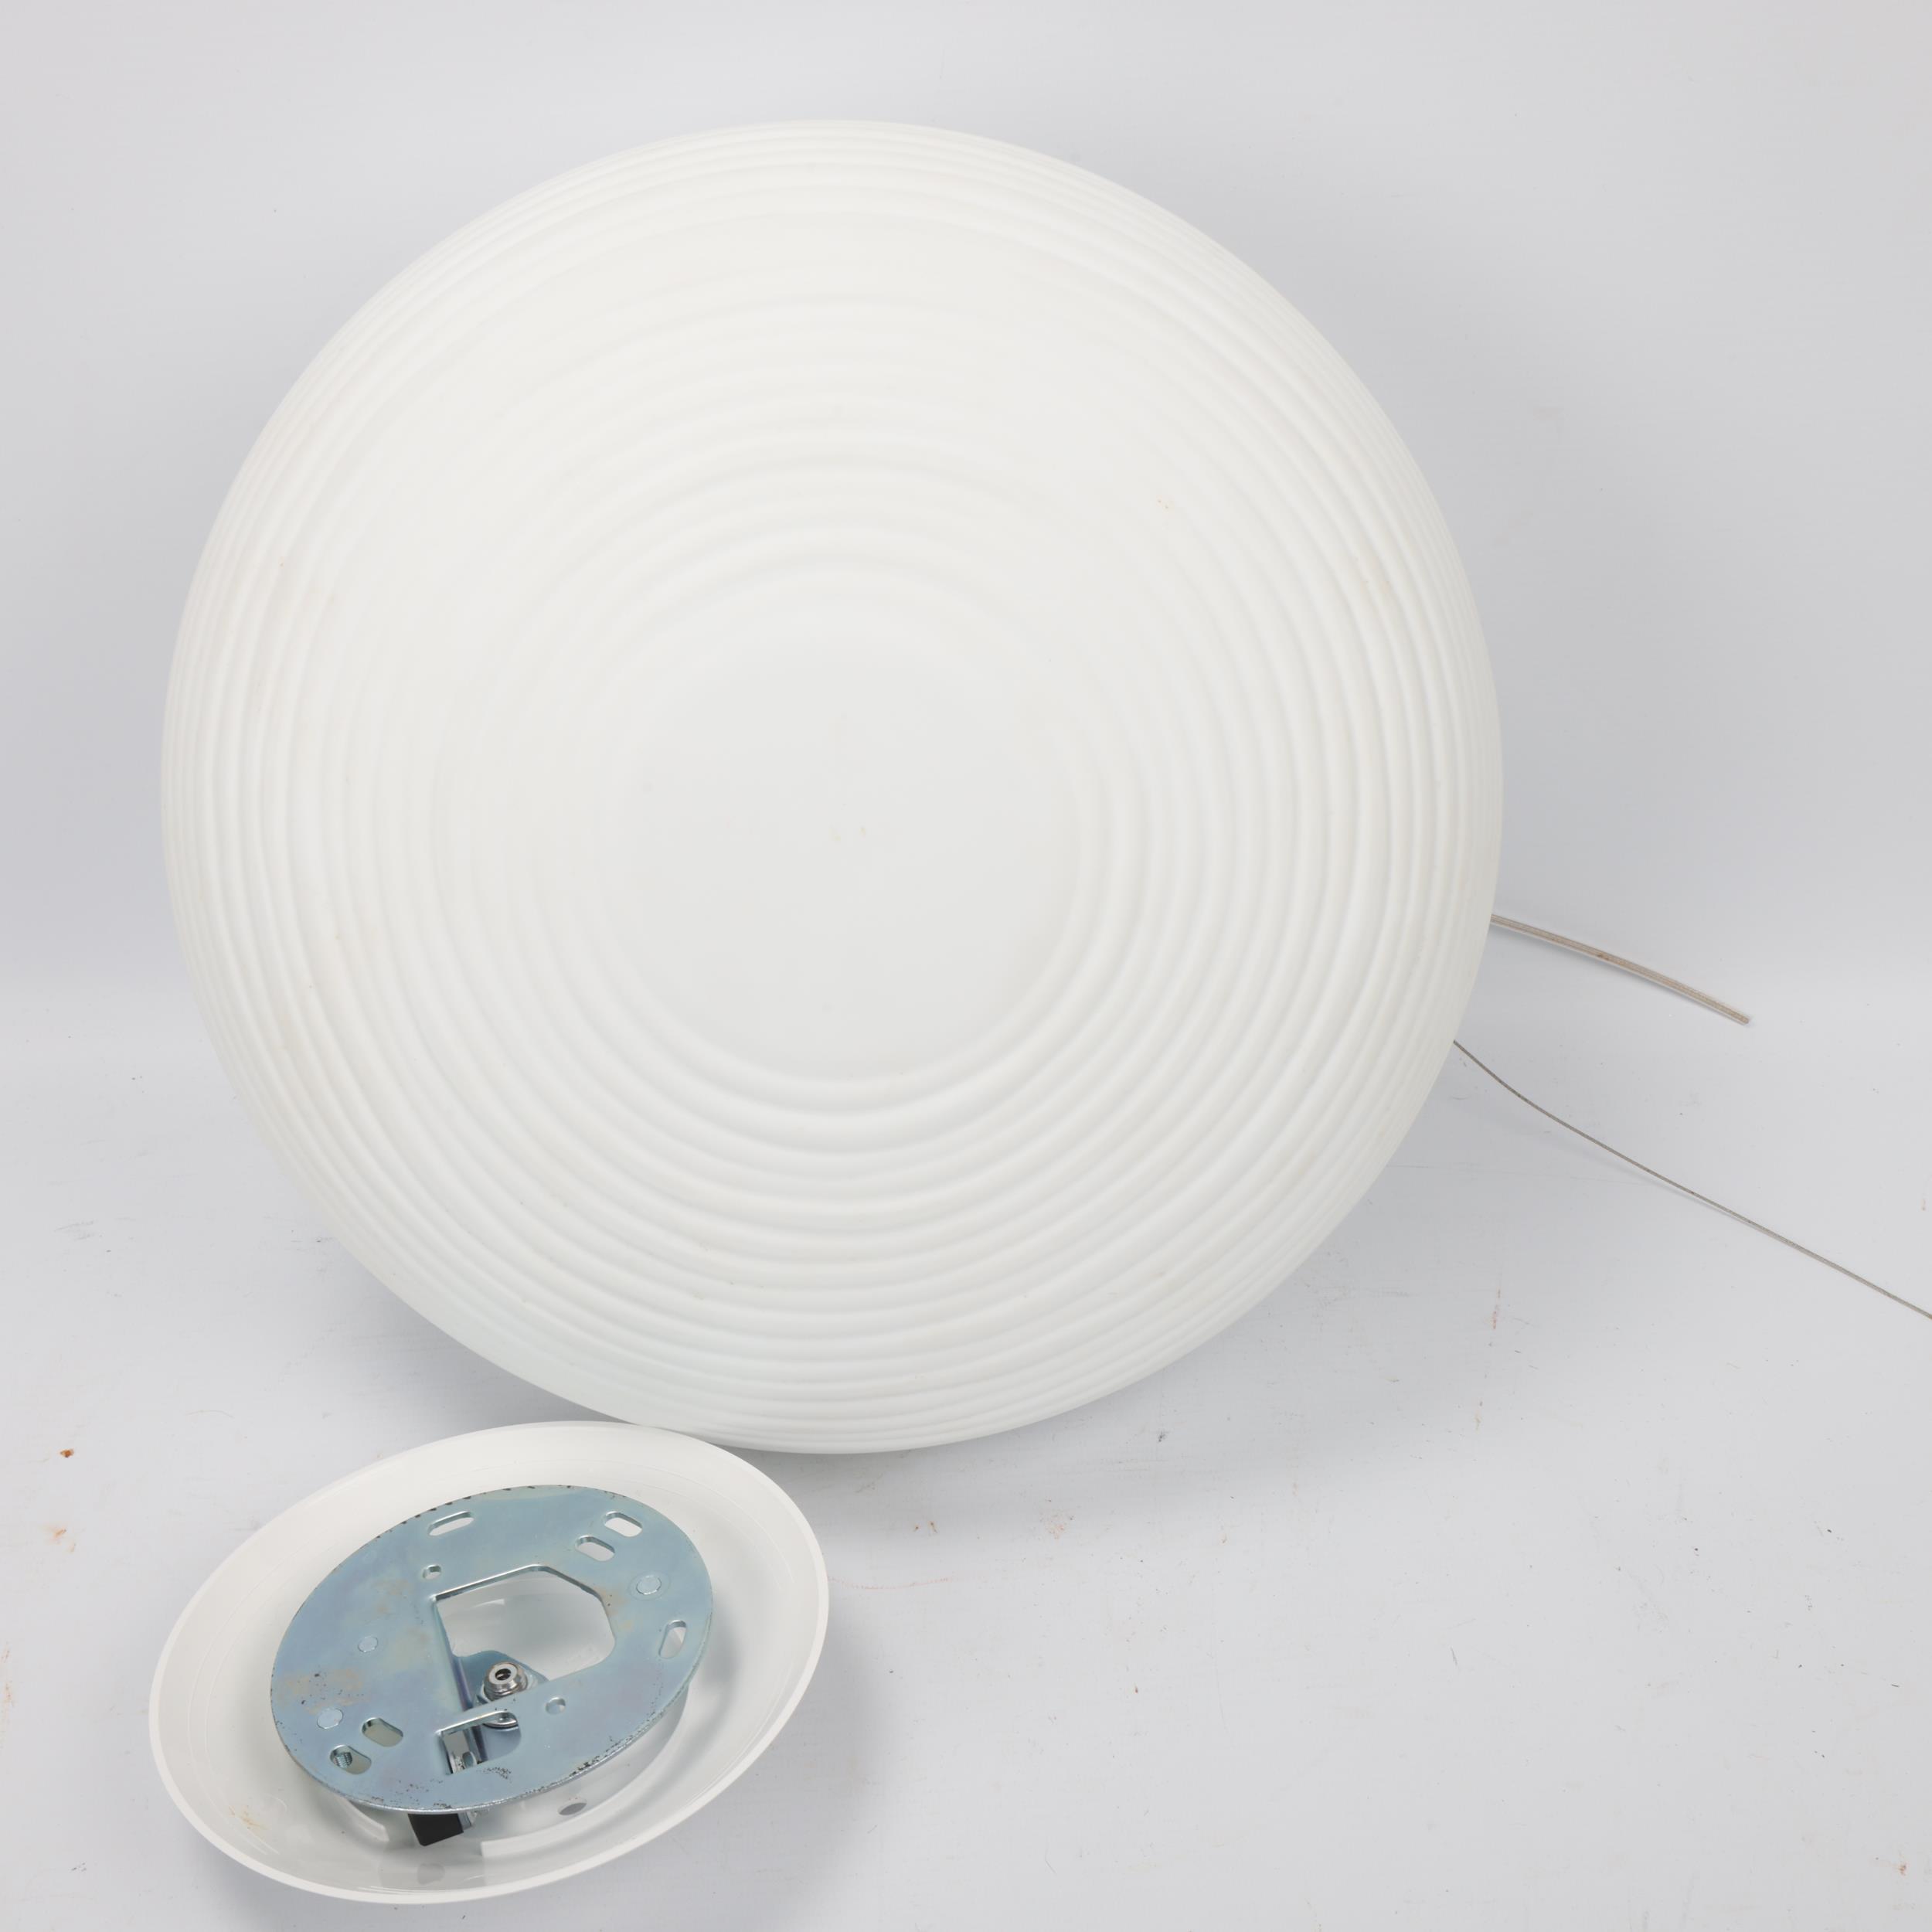 Foscarini "Rituals" white glass pendant lamp, with white metal ceiling rose, diameter approx 35cm, - Image 3 of 3